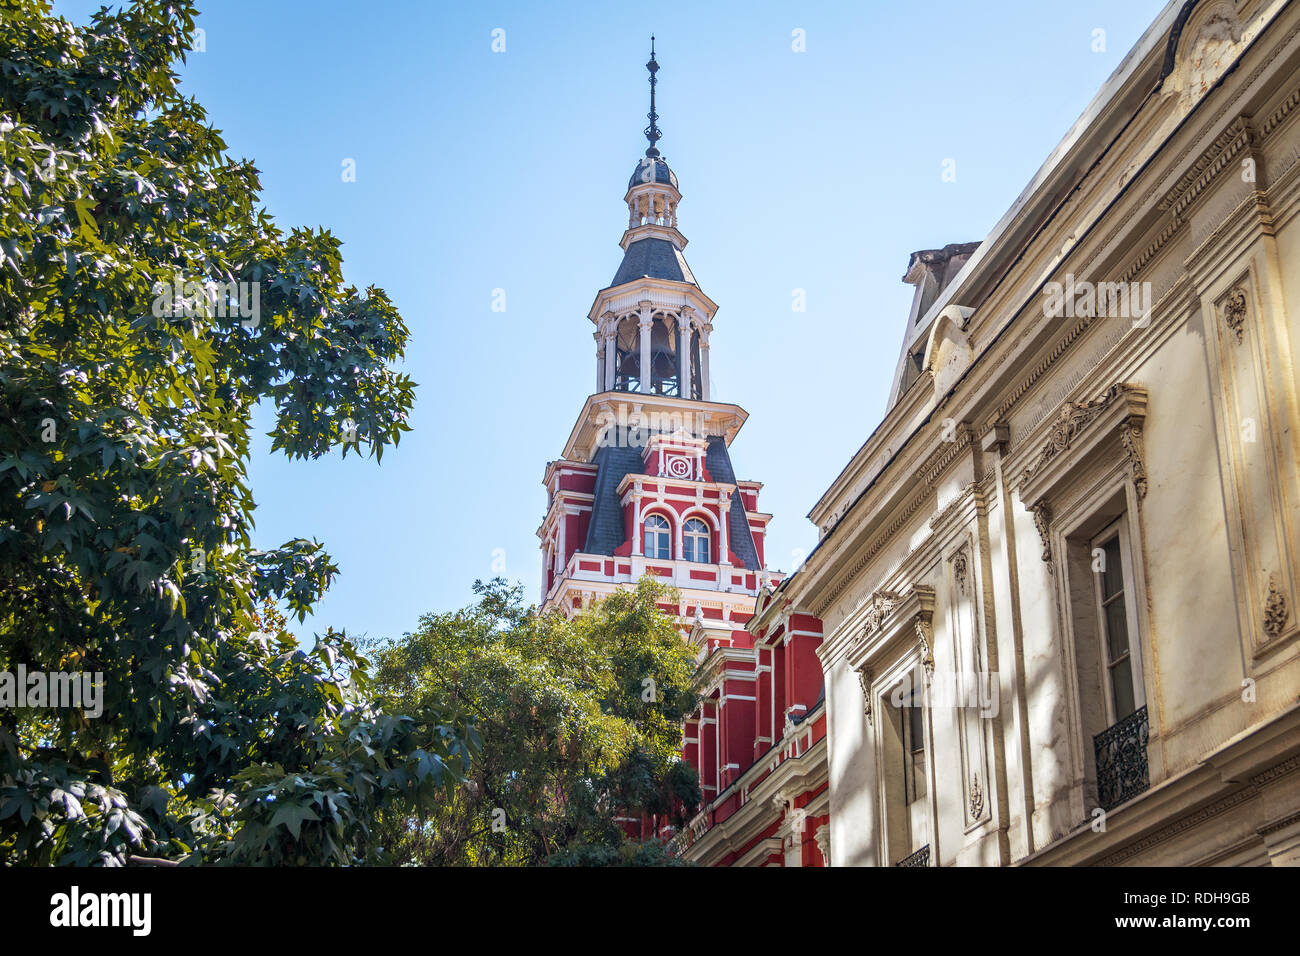 Fire Department Headquarters tower in Downtown Santiago - Santiago, Chile Stock Photo